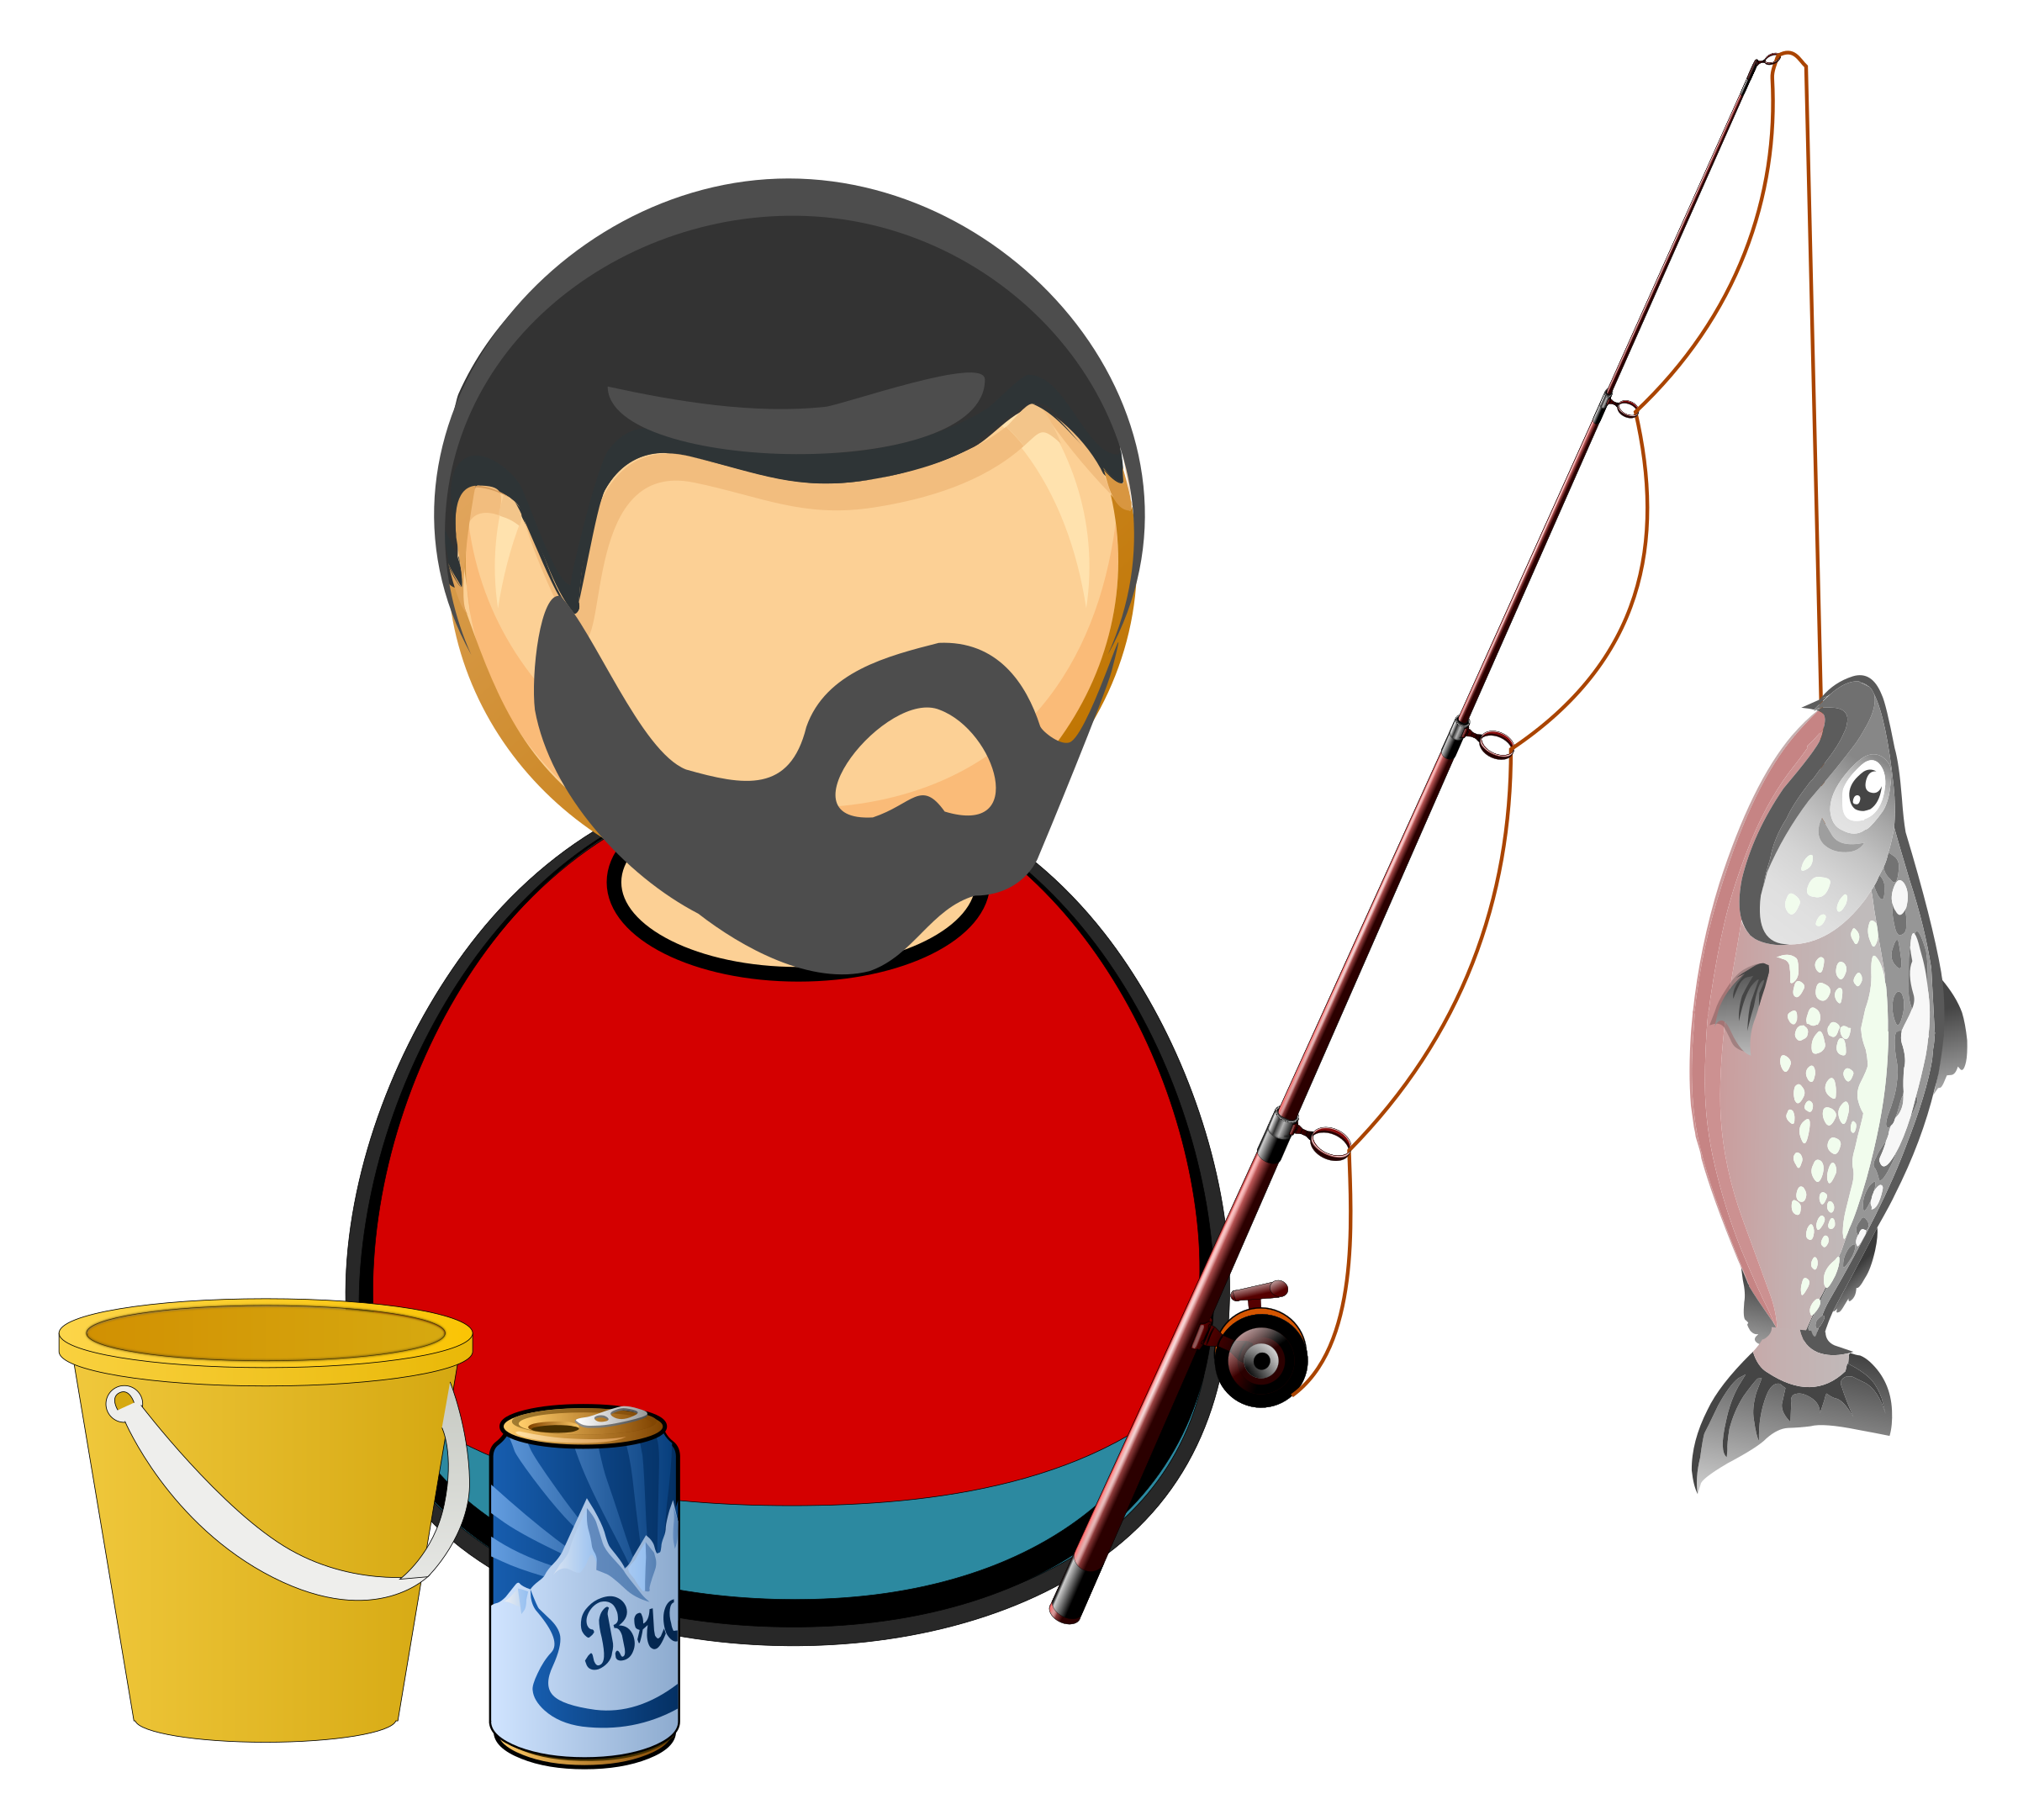 Fisherman and Angler Vector Clipart image - Free stock photo